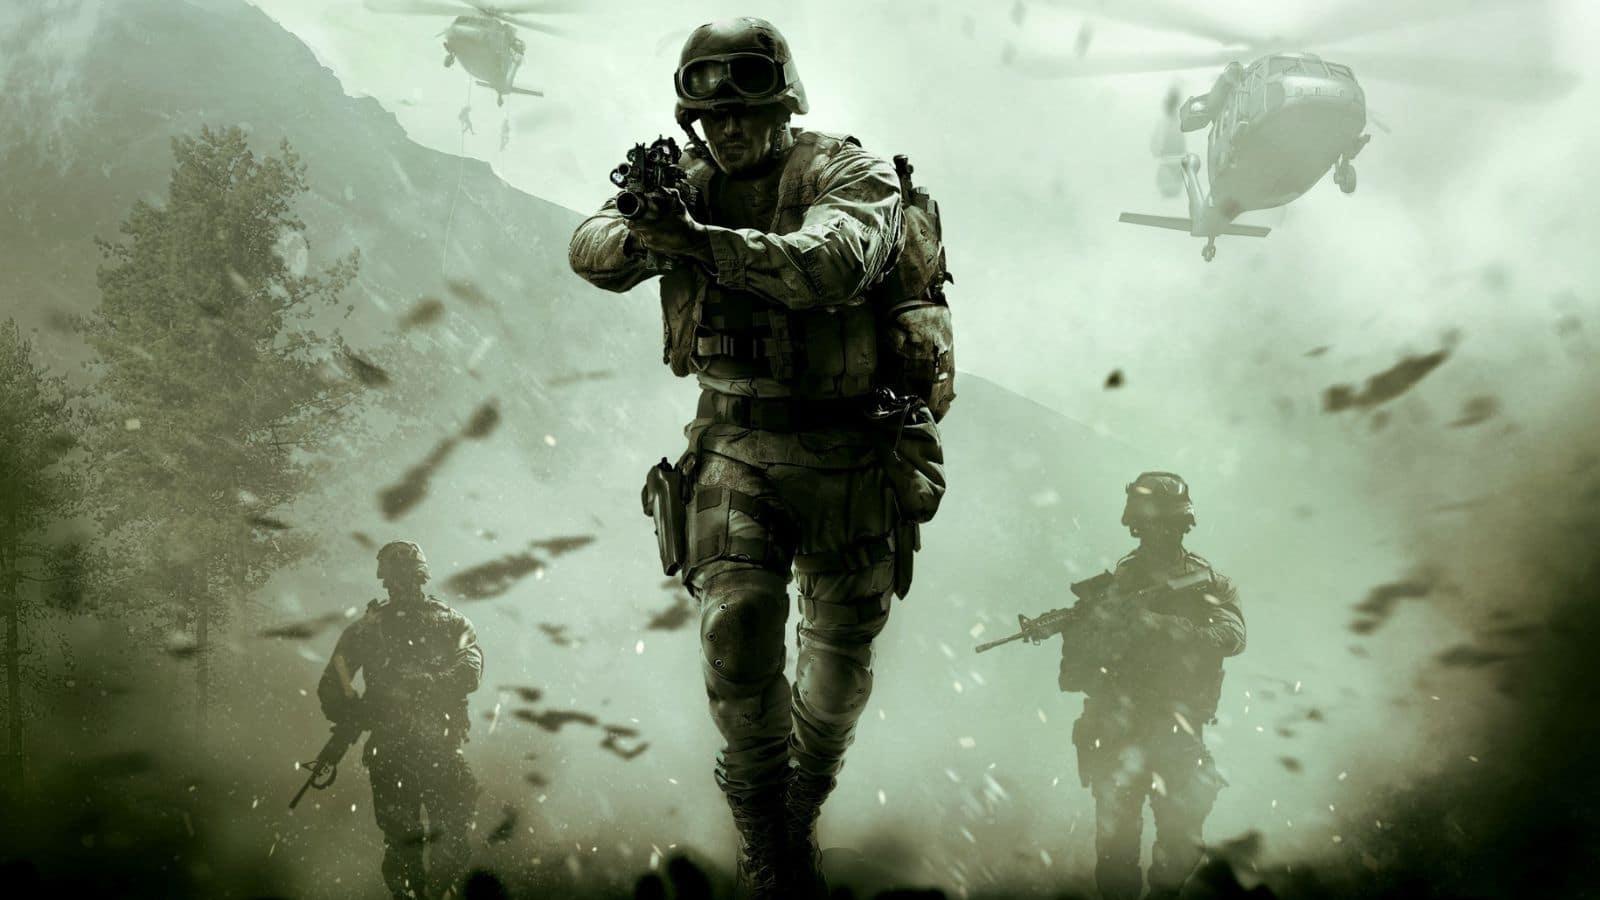 Best Call of Duty Games on PS4 